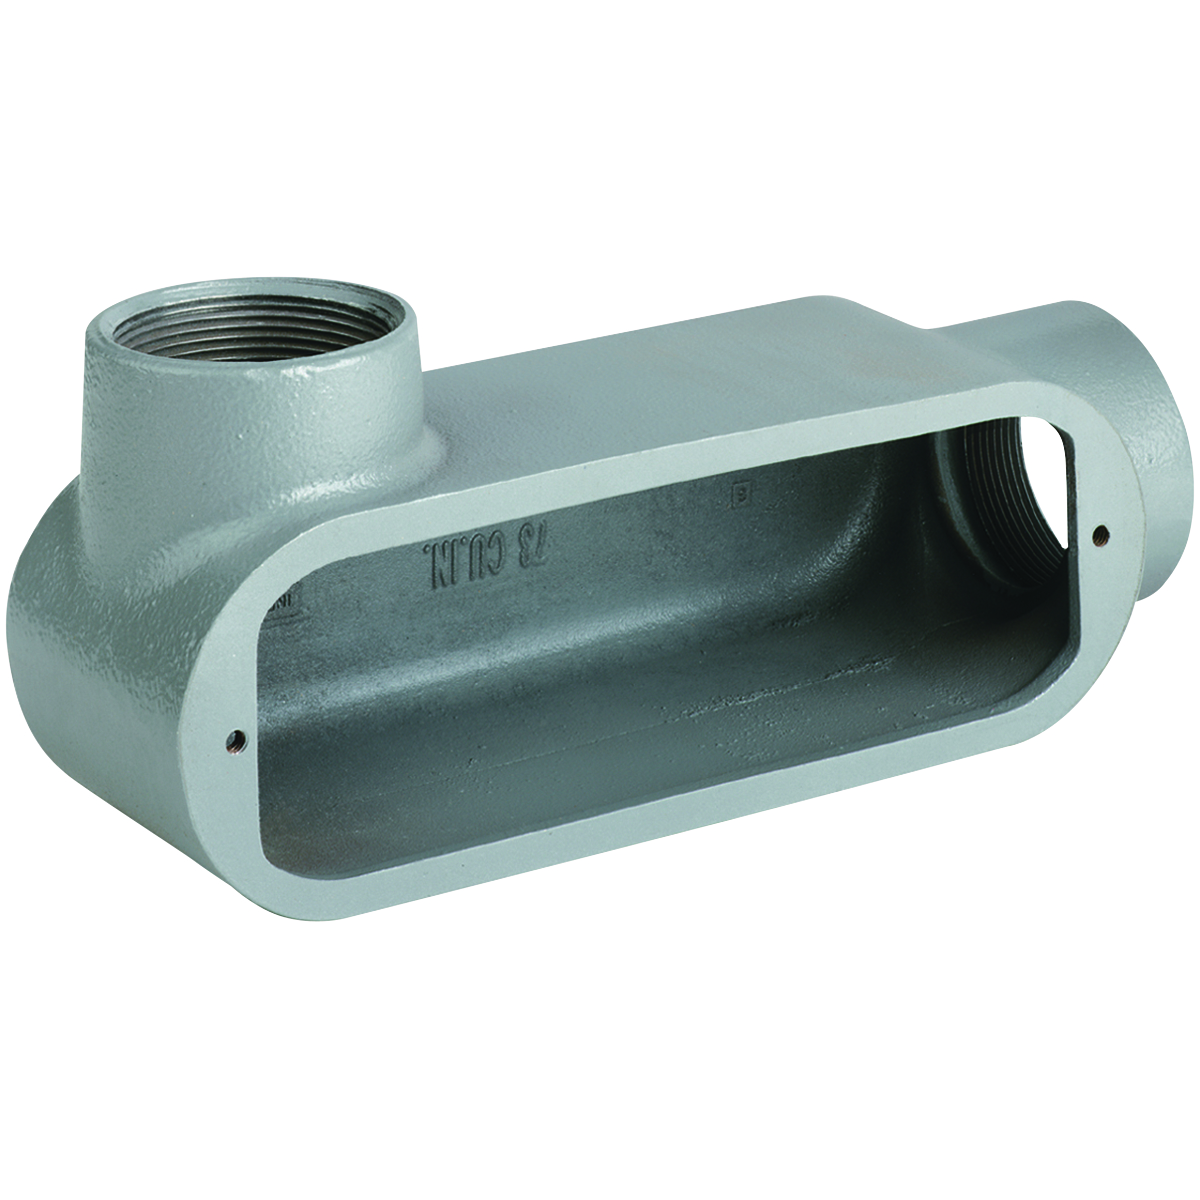 O SERIES/DURALOY 5 SERIES - MALLEABLE IRON CONDUIT BODY - LL TYPE - HUBSIZE 3-1/2 INCH - VOLUME 292.0 CUBIC INCHES